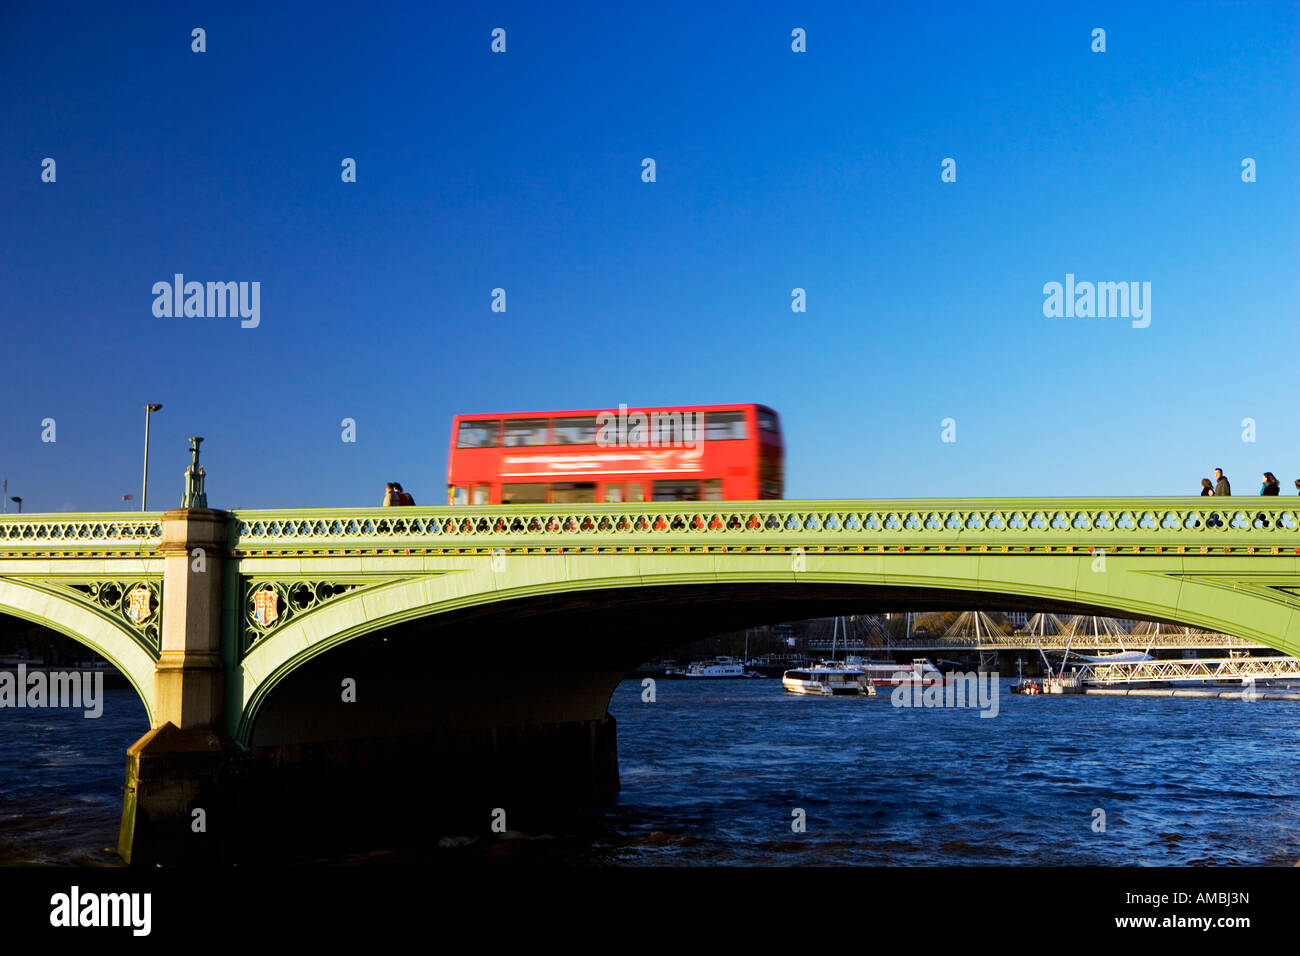 Red Bus londinese andando oltre il Westminster Bridge London Inghilterra England Foto Stock